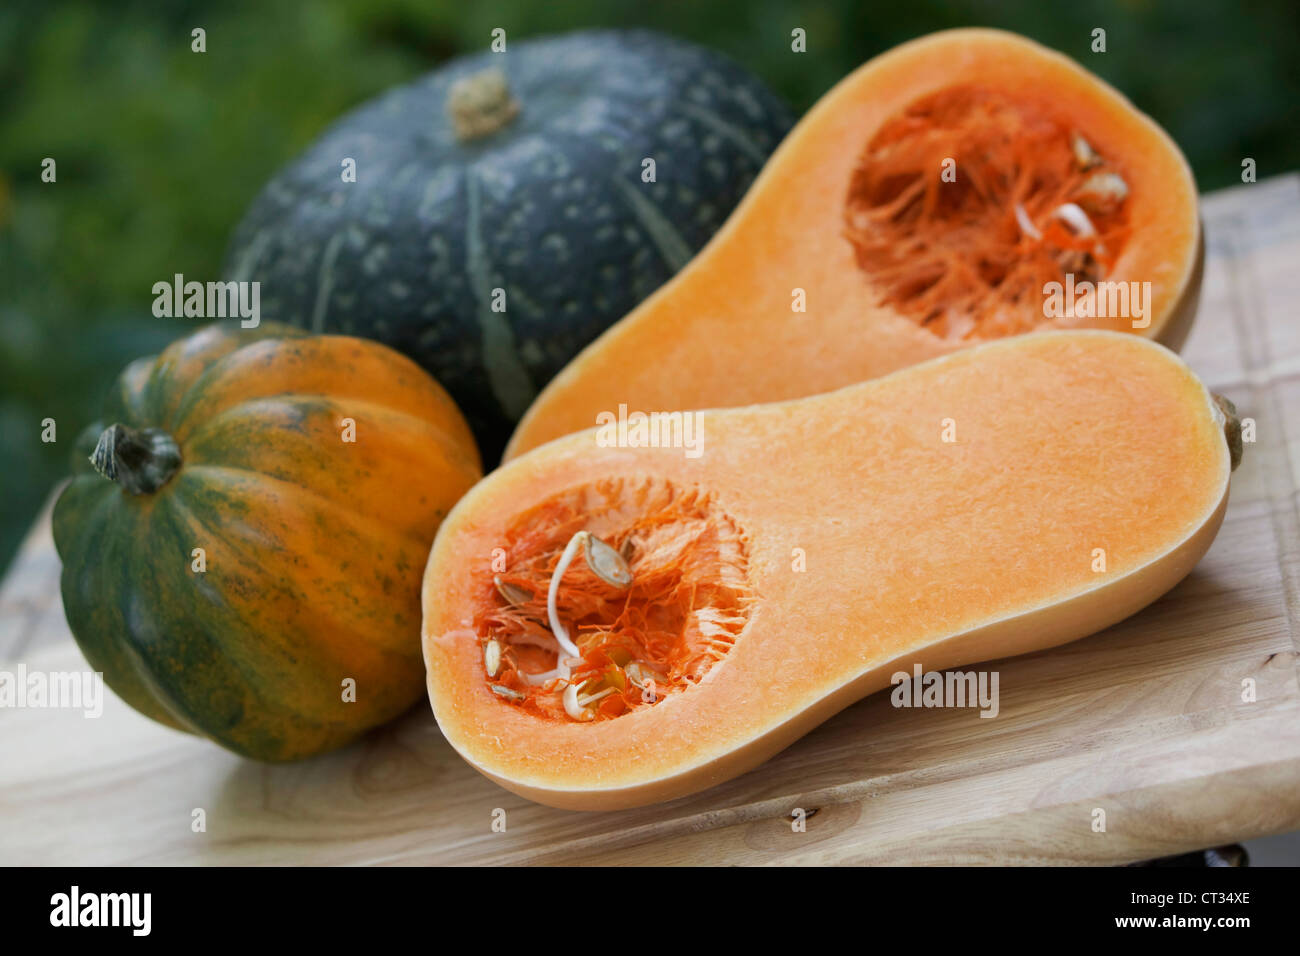 Squash Butternut  Acorn and Buttercup Squash, Whole Vegetable Squashes Stock Photo